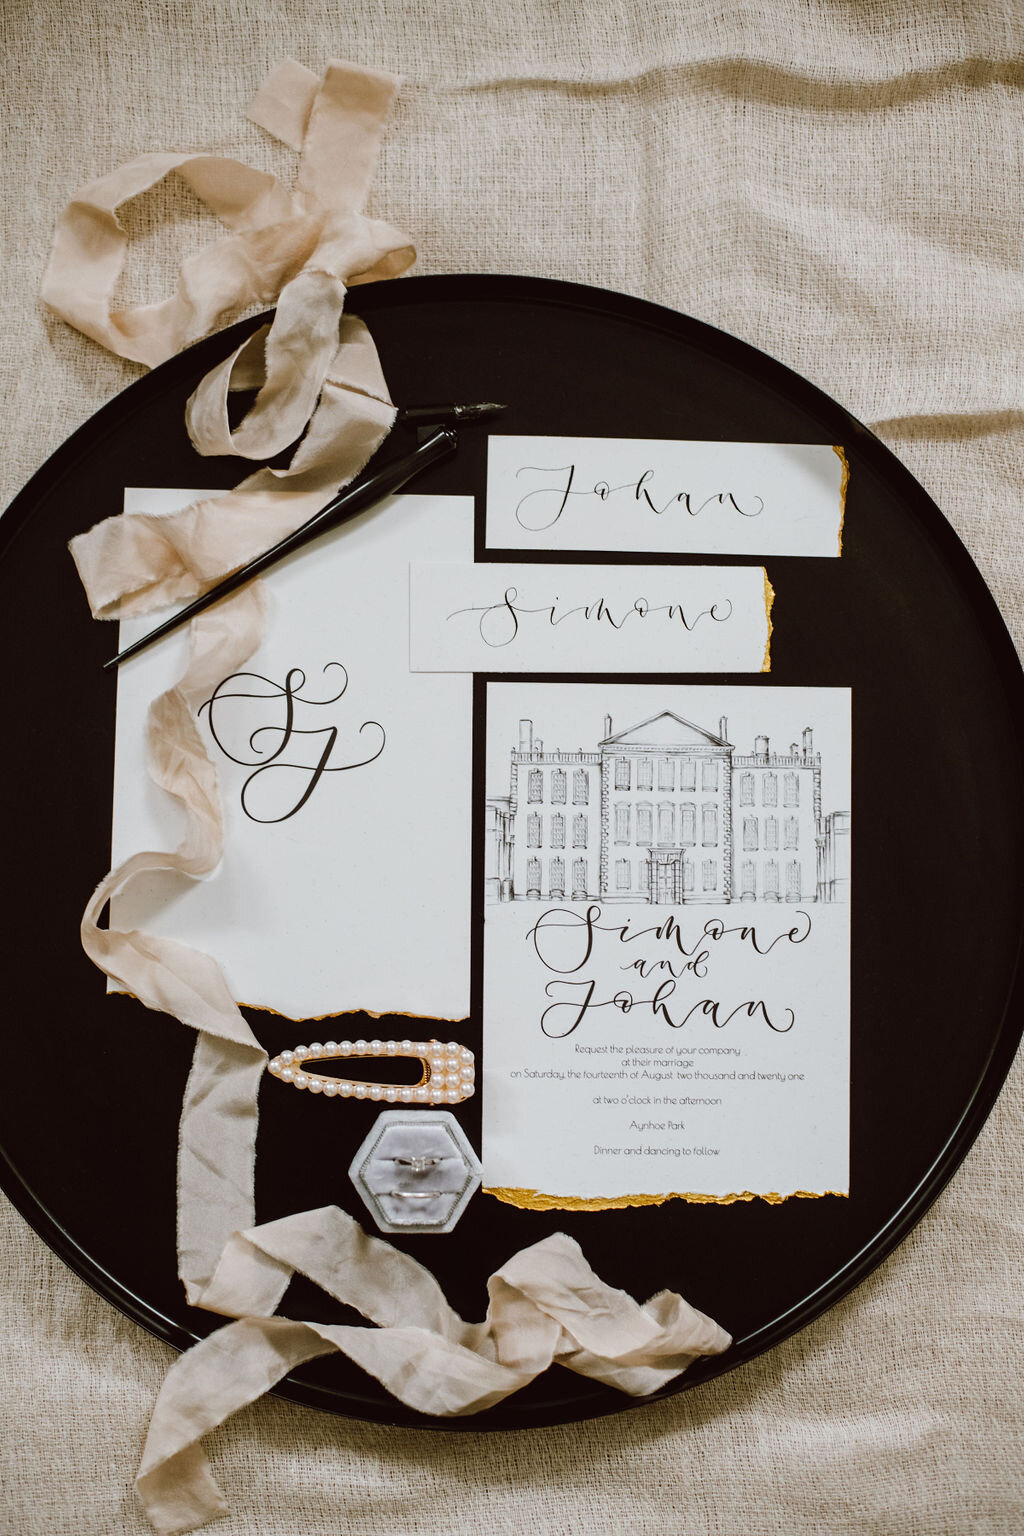 Monochrome Aynhoe Park invitation suite printed on recycled paper with gold details by The Amyverse.jpg